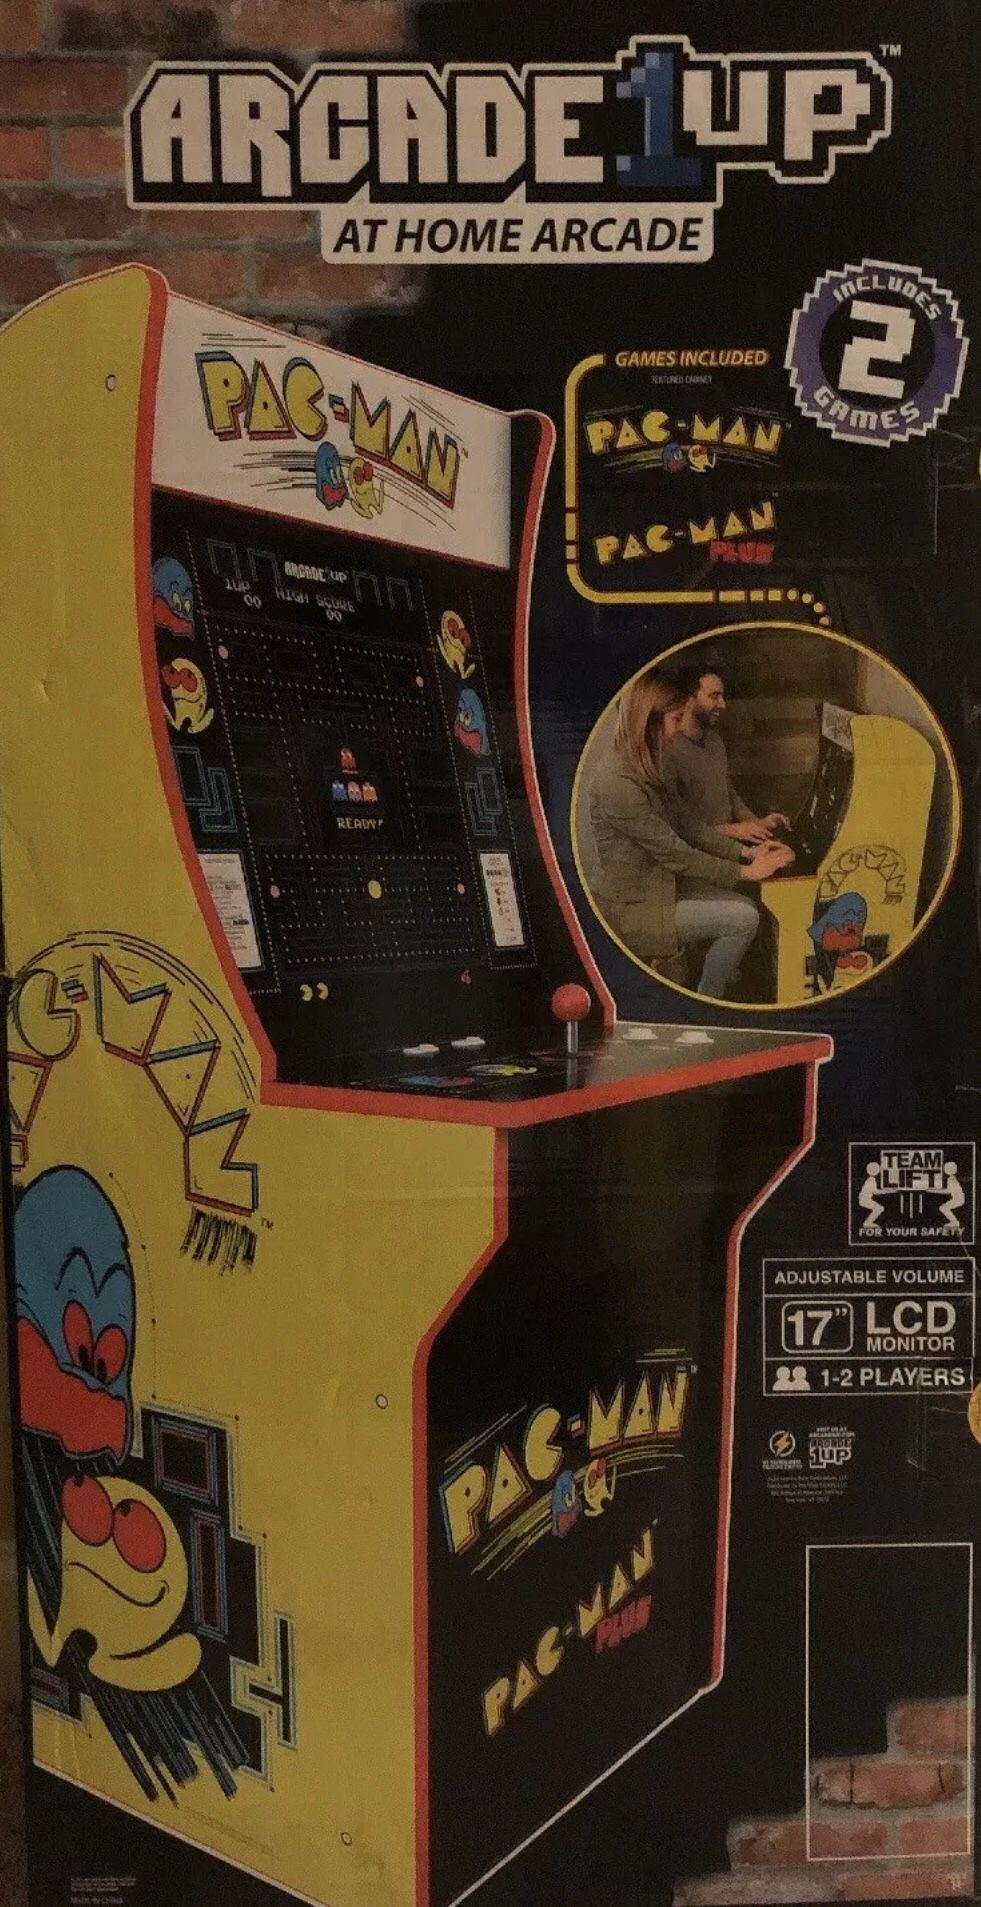 PAC-MAN 4FT ARCADE BRAND NEW!!SOLD OUT EVERYWHERE! LAST ONE